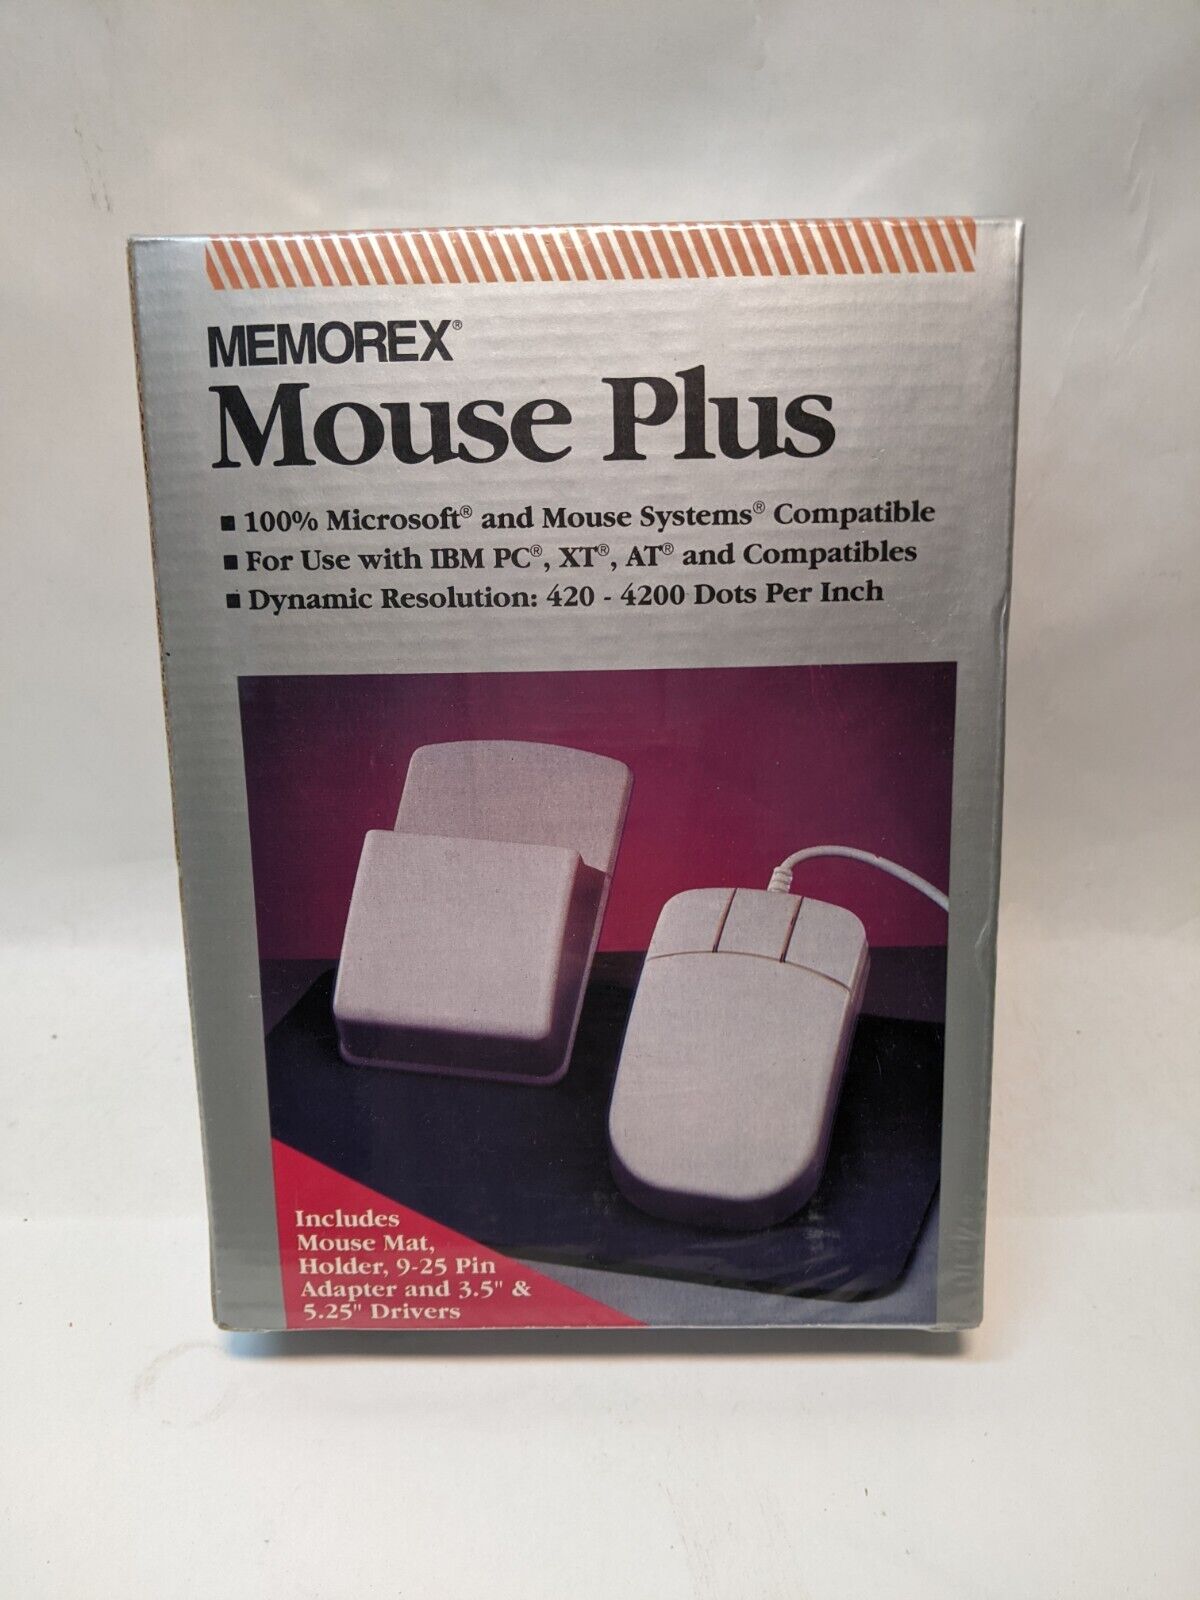 Memorex Mouse Plus New in box Sealed - 1993 Vintage Computer Mouse